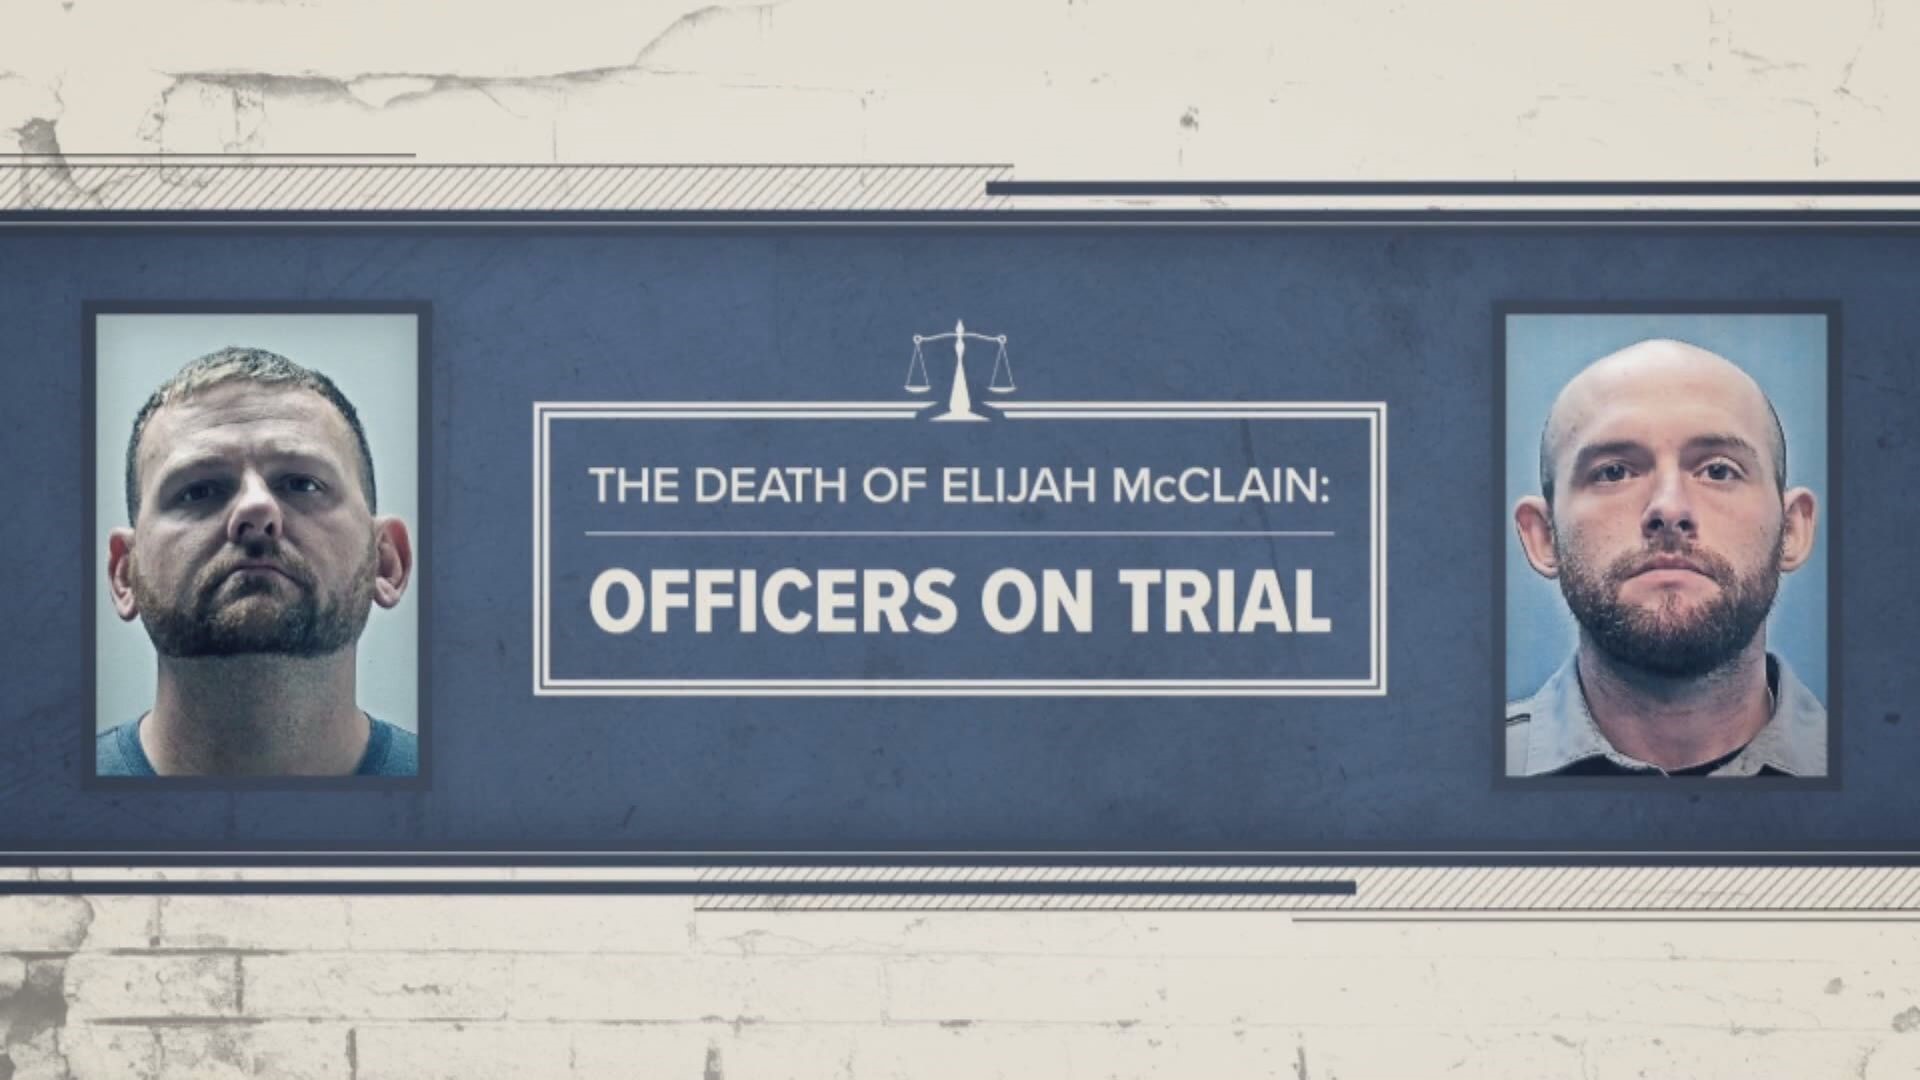 9NEWS Director of Special Projects Chris Vanderveen explains central questions in trial of officers Randy Roedema and Jason Rosenblatt in the death of Elijah McClain